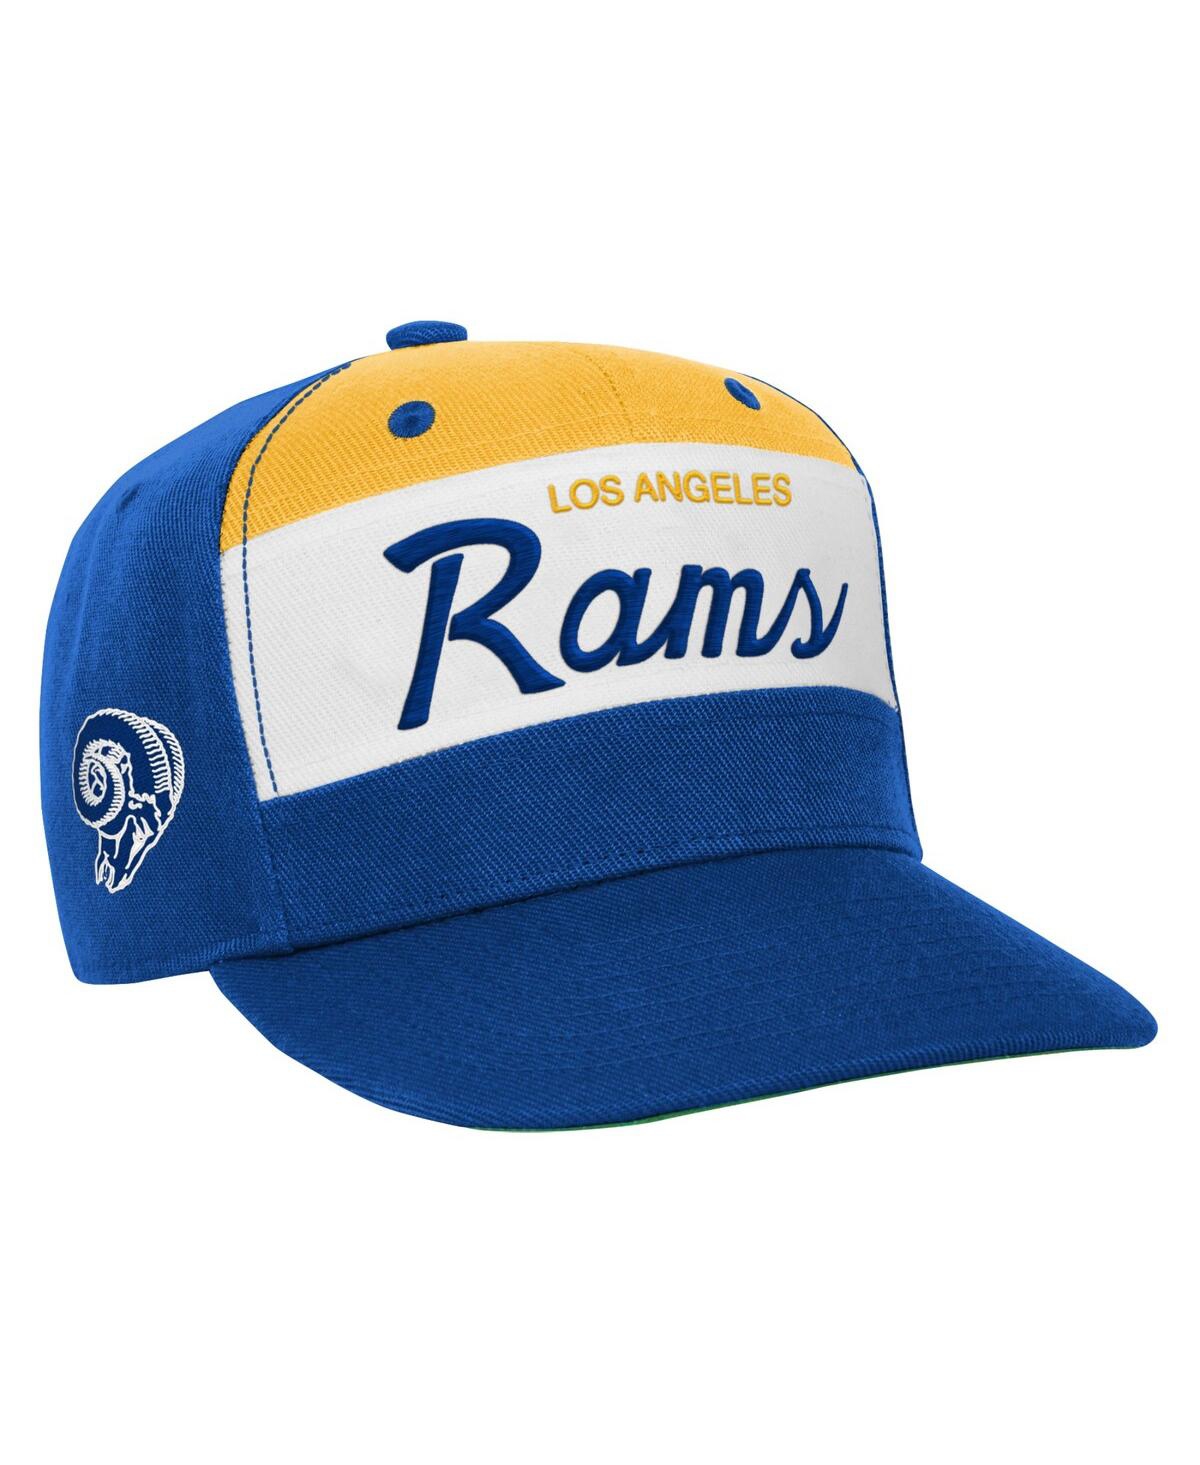 Mitchell & Ness Kids' Youth Boys And Girls  Royal Los Angeles Rams Retro Sport Snapback Hat